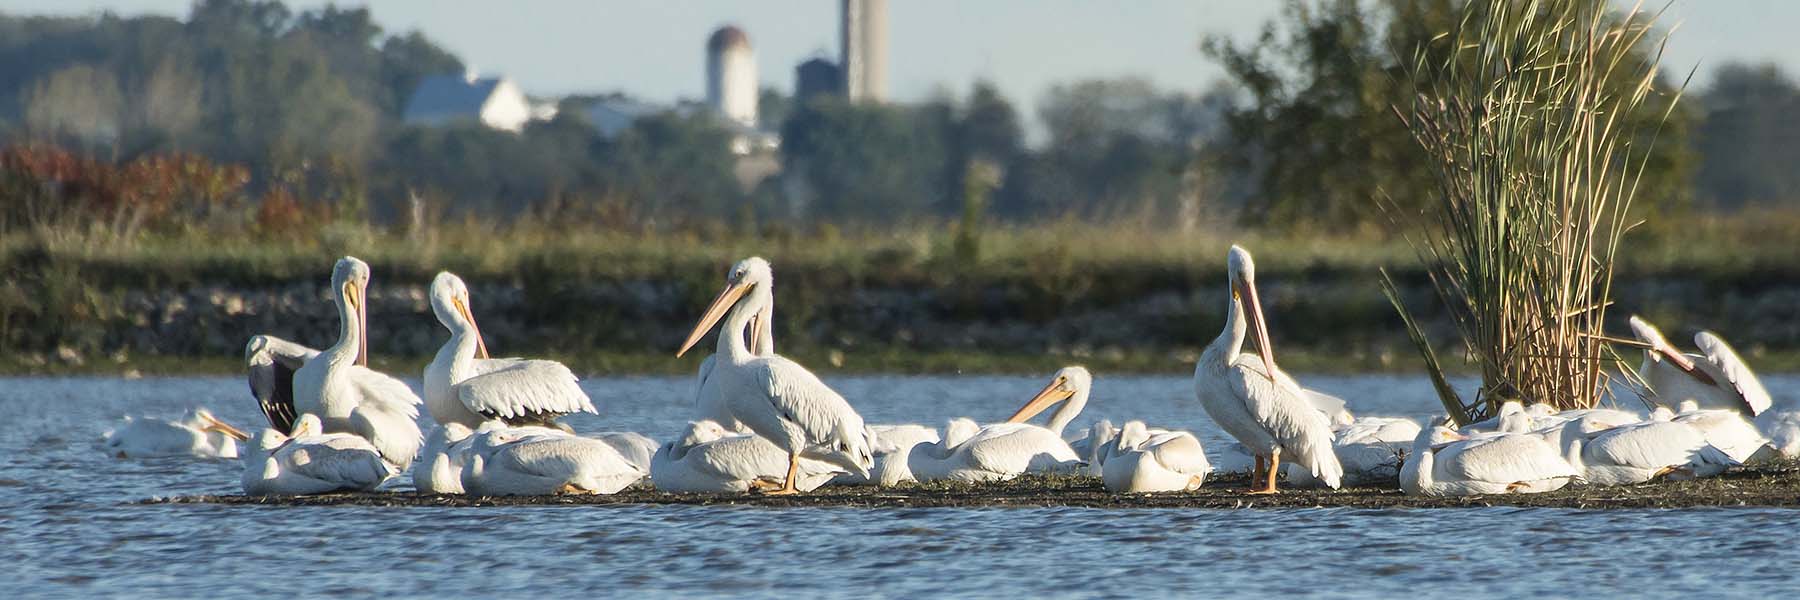 Several American White Pelicans rest together in one of the large pools of water at Goose Pond FWA in Greene County, Indiana. Farm buildings are seen in the distant background.